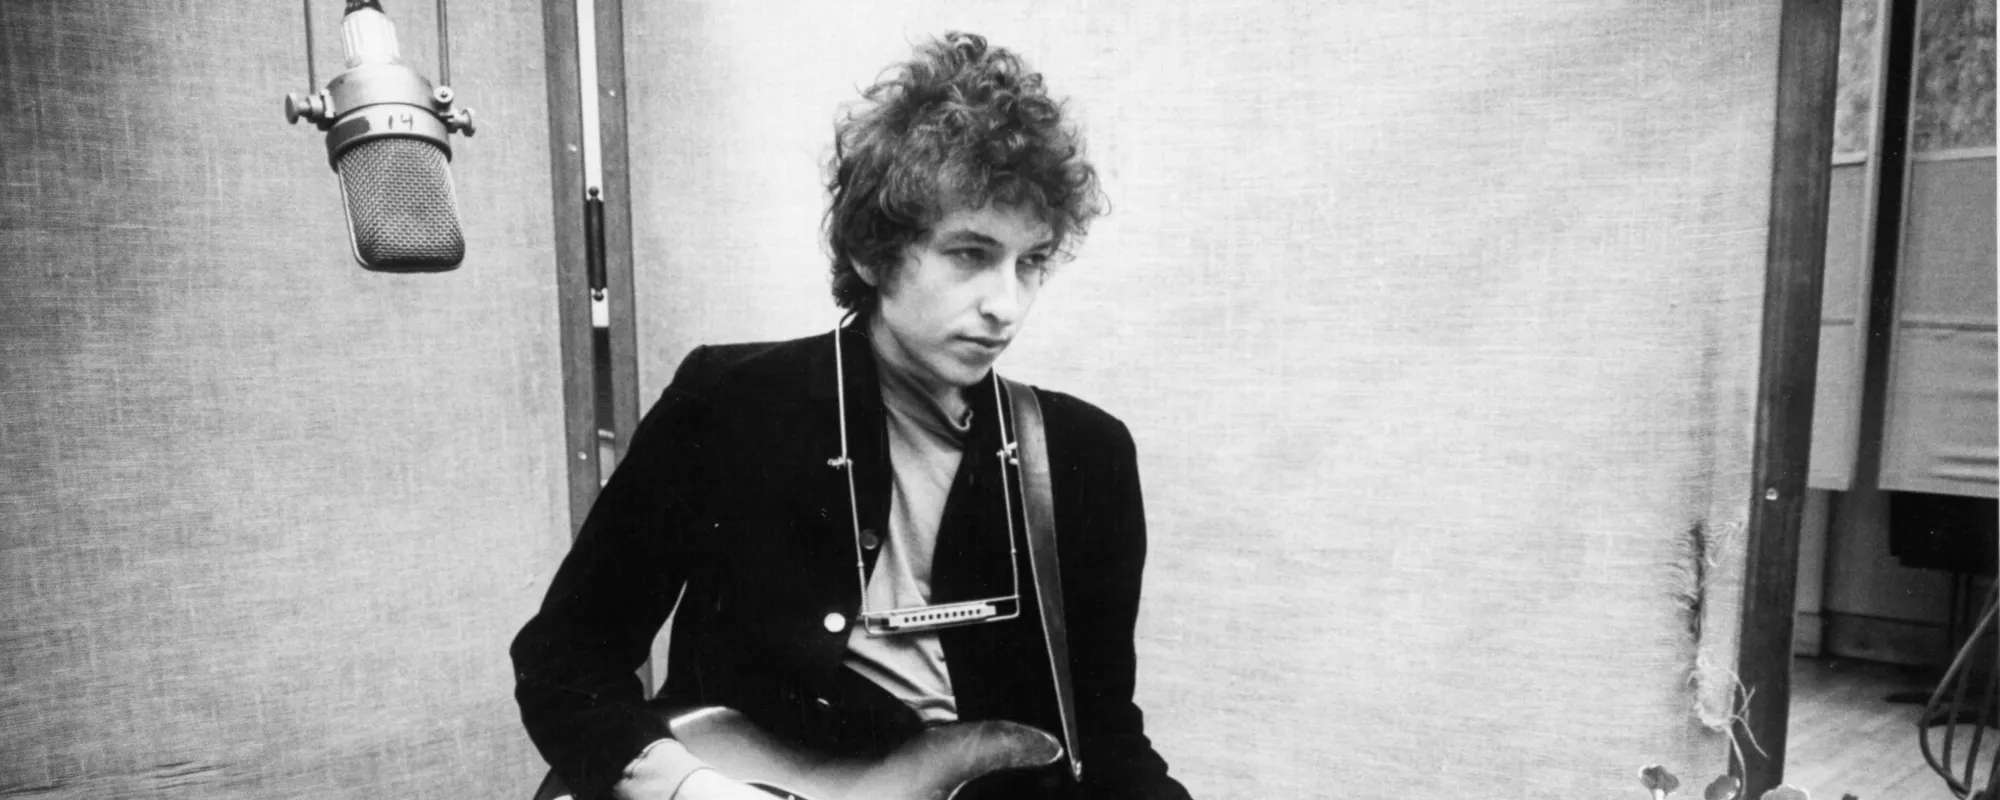 Bet you didn't know Bob Dylan wrote these famous songs